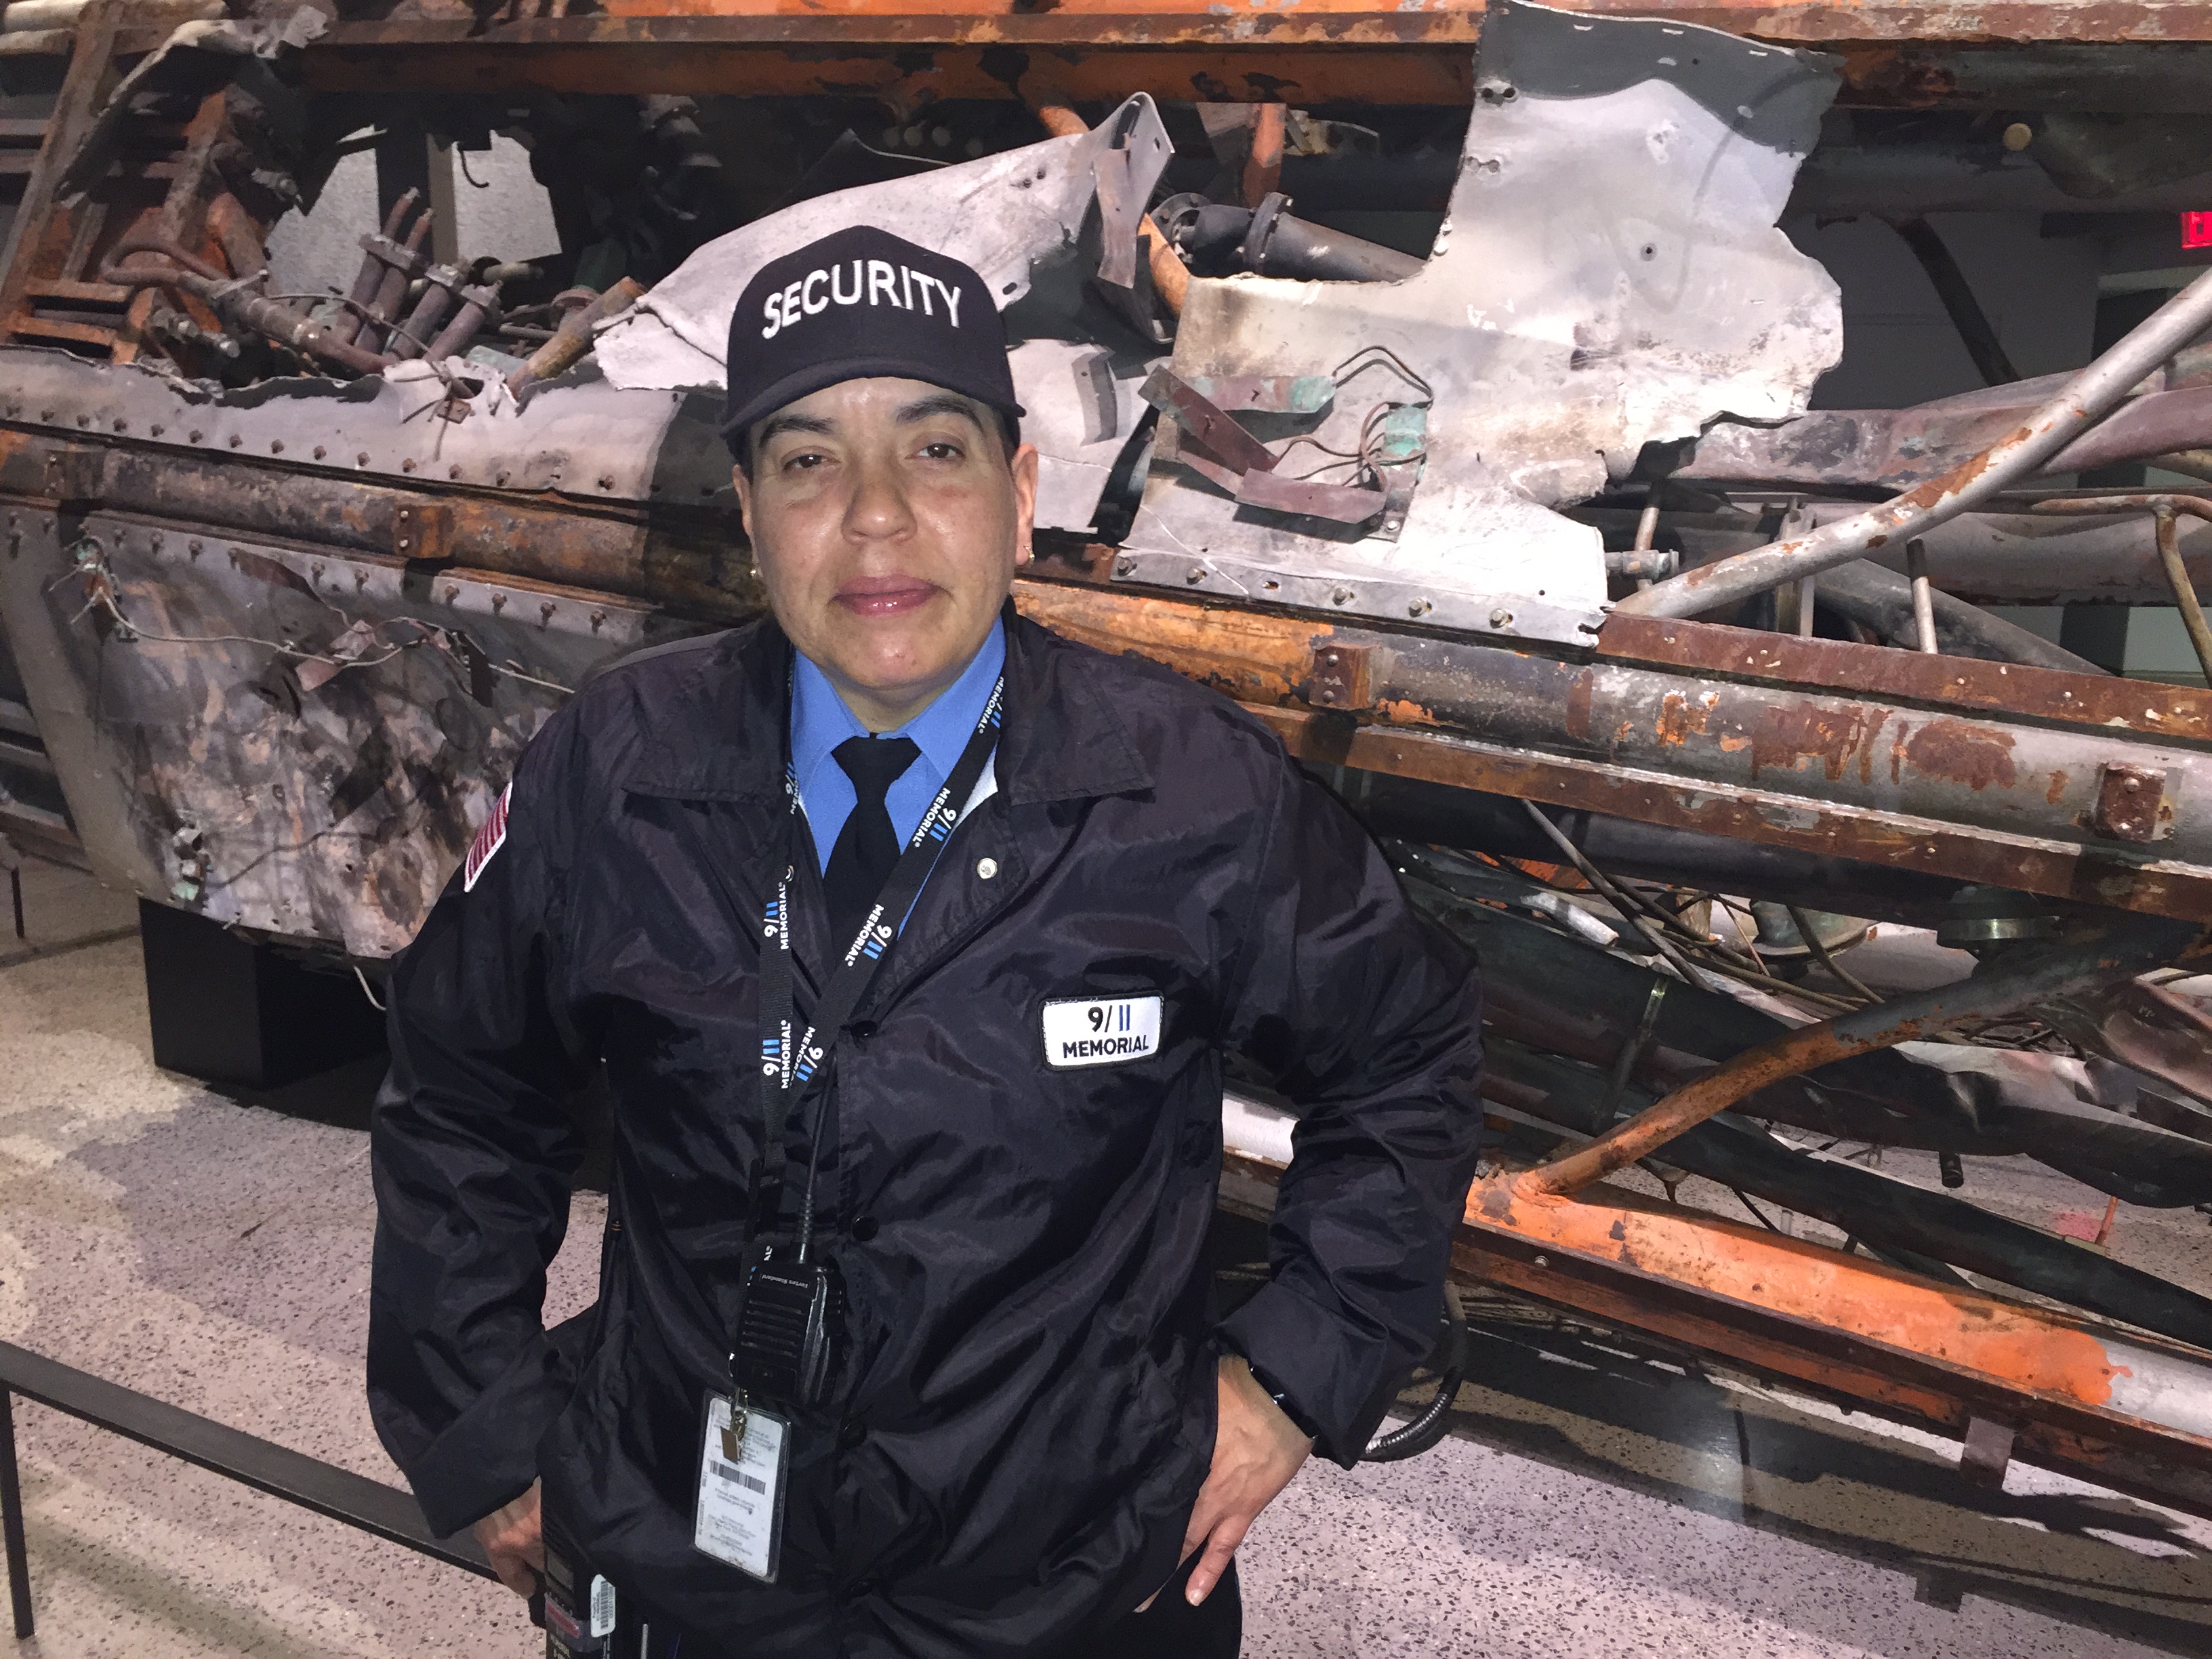 9/11 Memorial Museum security guard Mary Santos stands in front of a destroyed radio and television antenna from the North Tower.